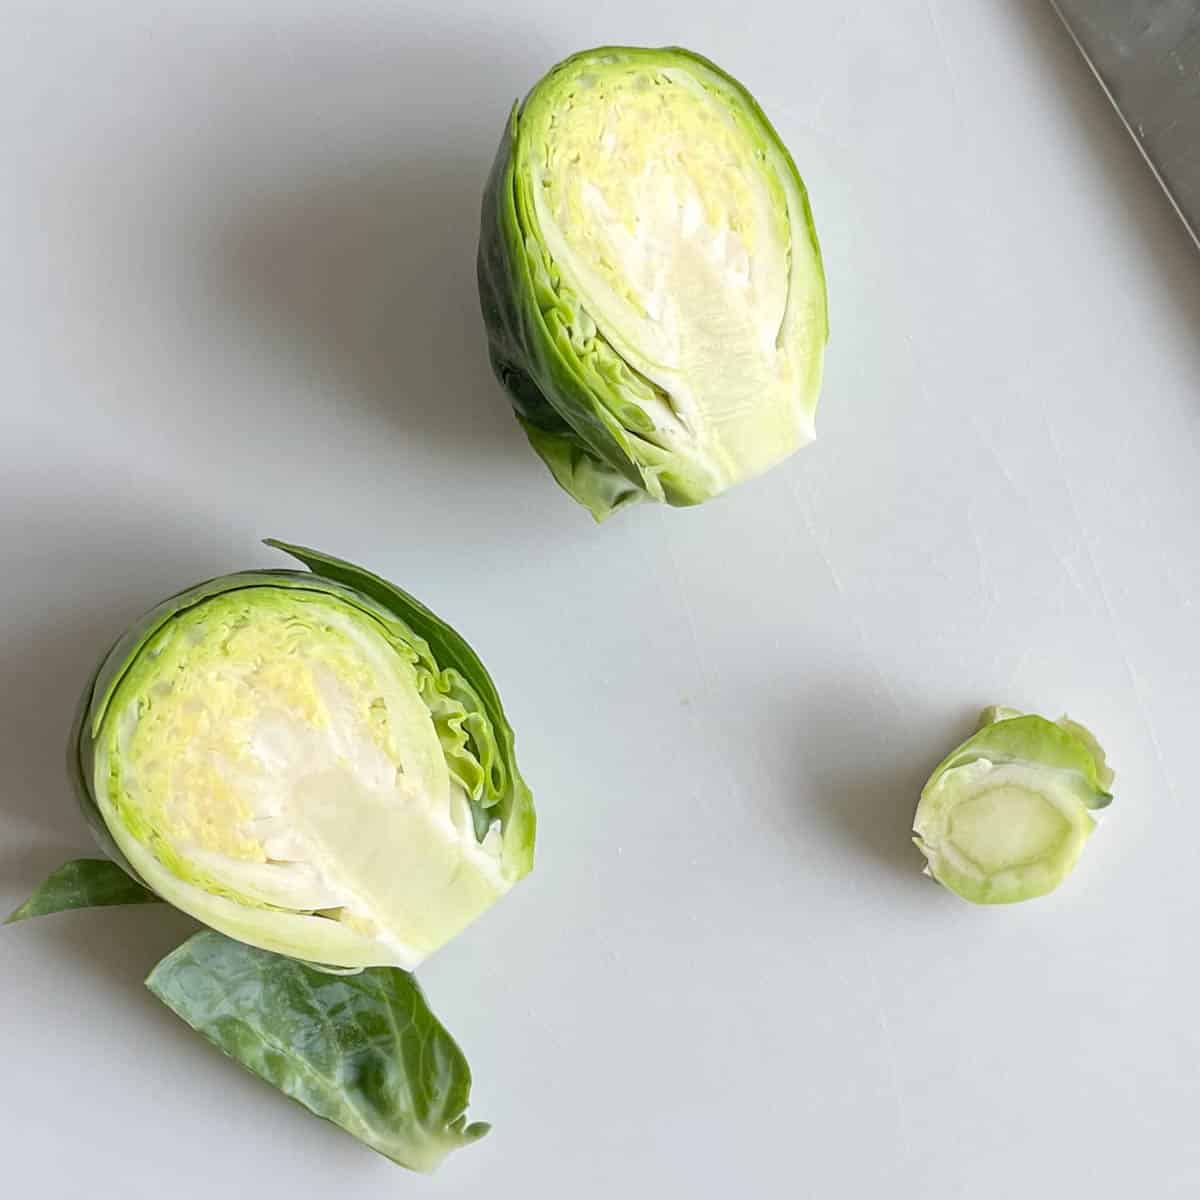 A halved brussels sprout with the end removed are shown on a white cutting board.